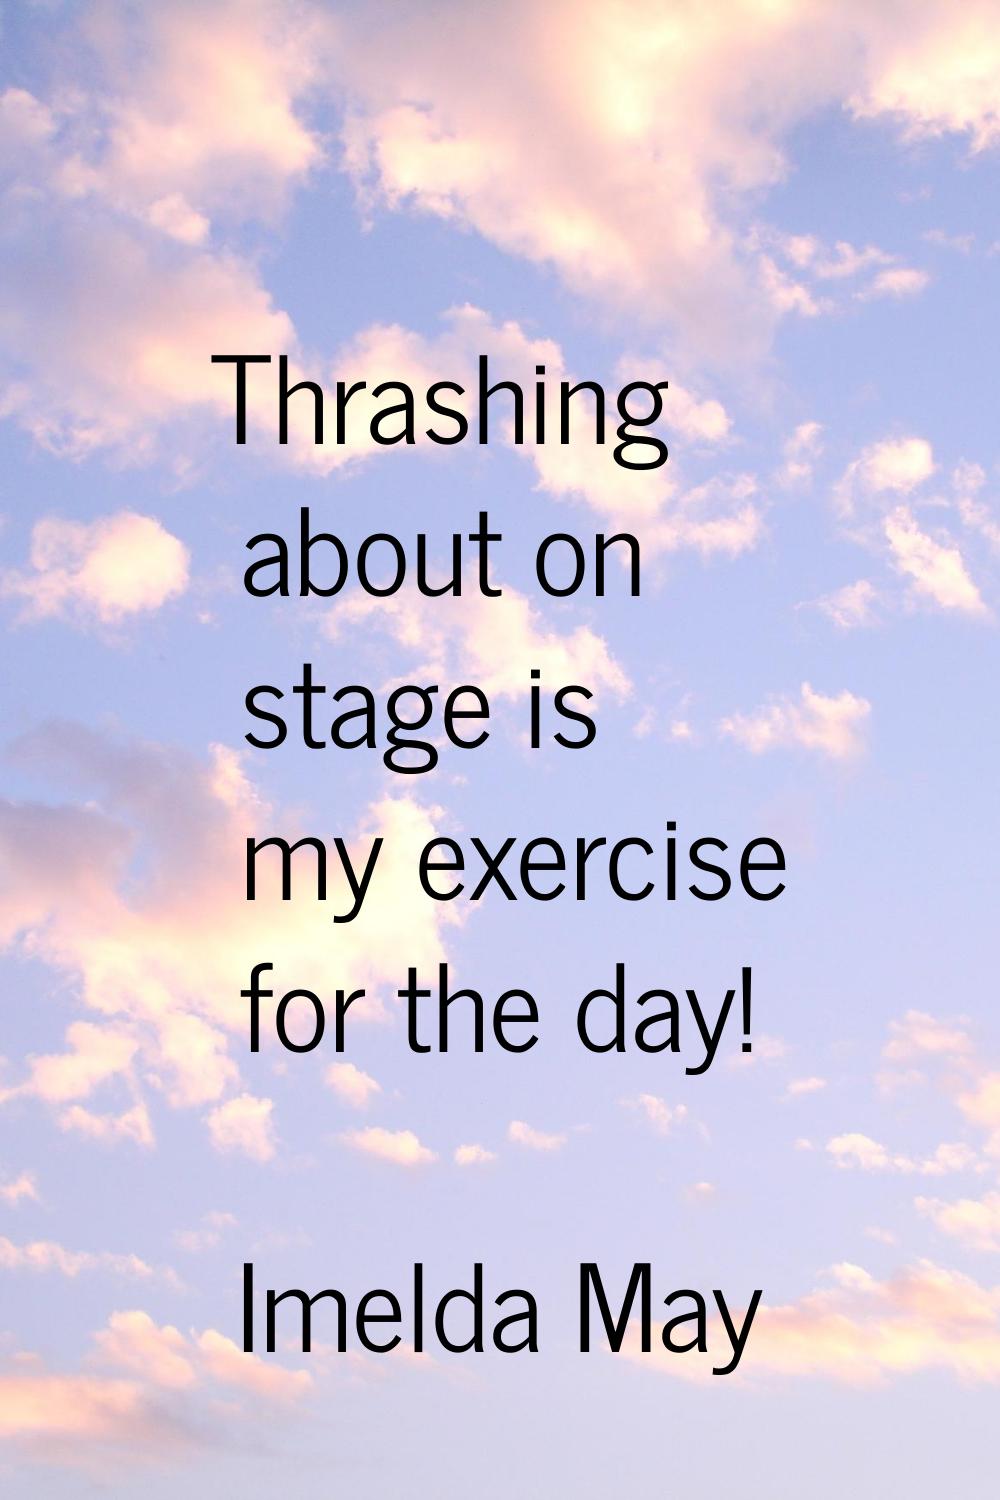 Thrashing about on stage is my exercise for the day!